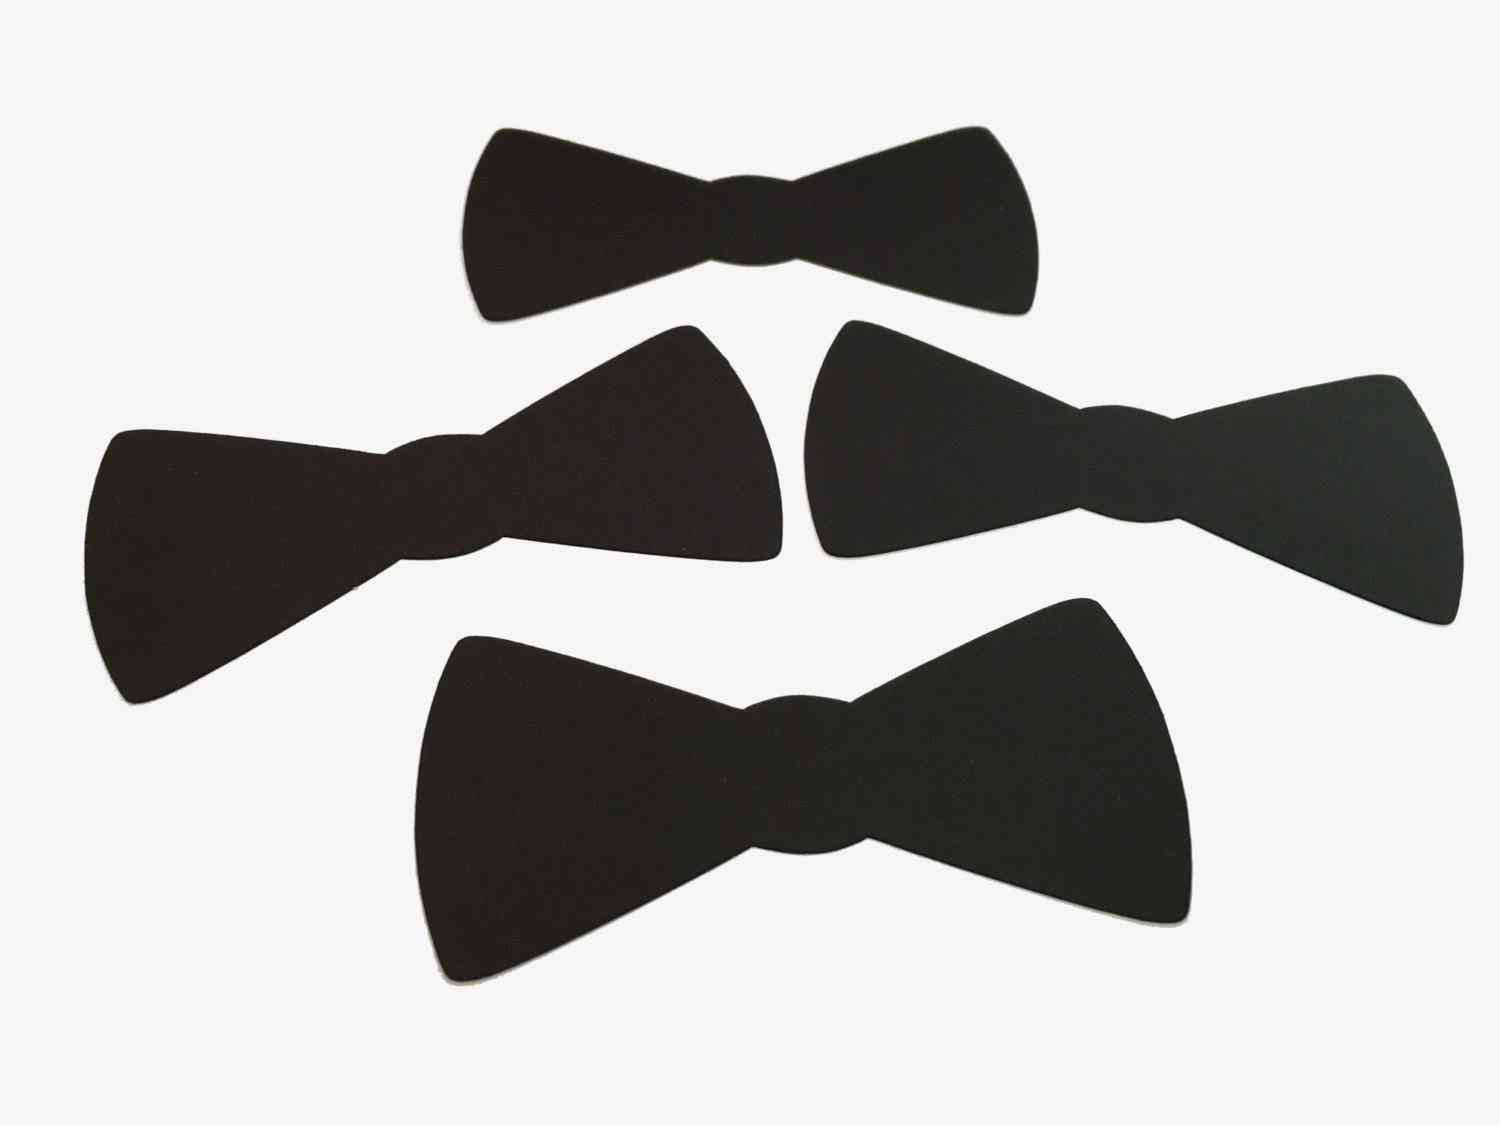 Bow Tie Cut Out Bow Tie Die Cuts Set Of 25 2 8 Inch Bow Tie Cut Outs